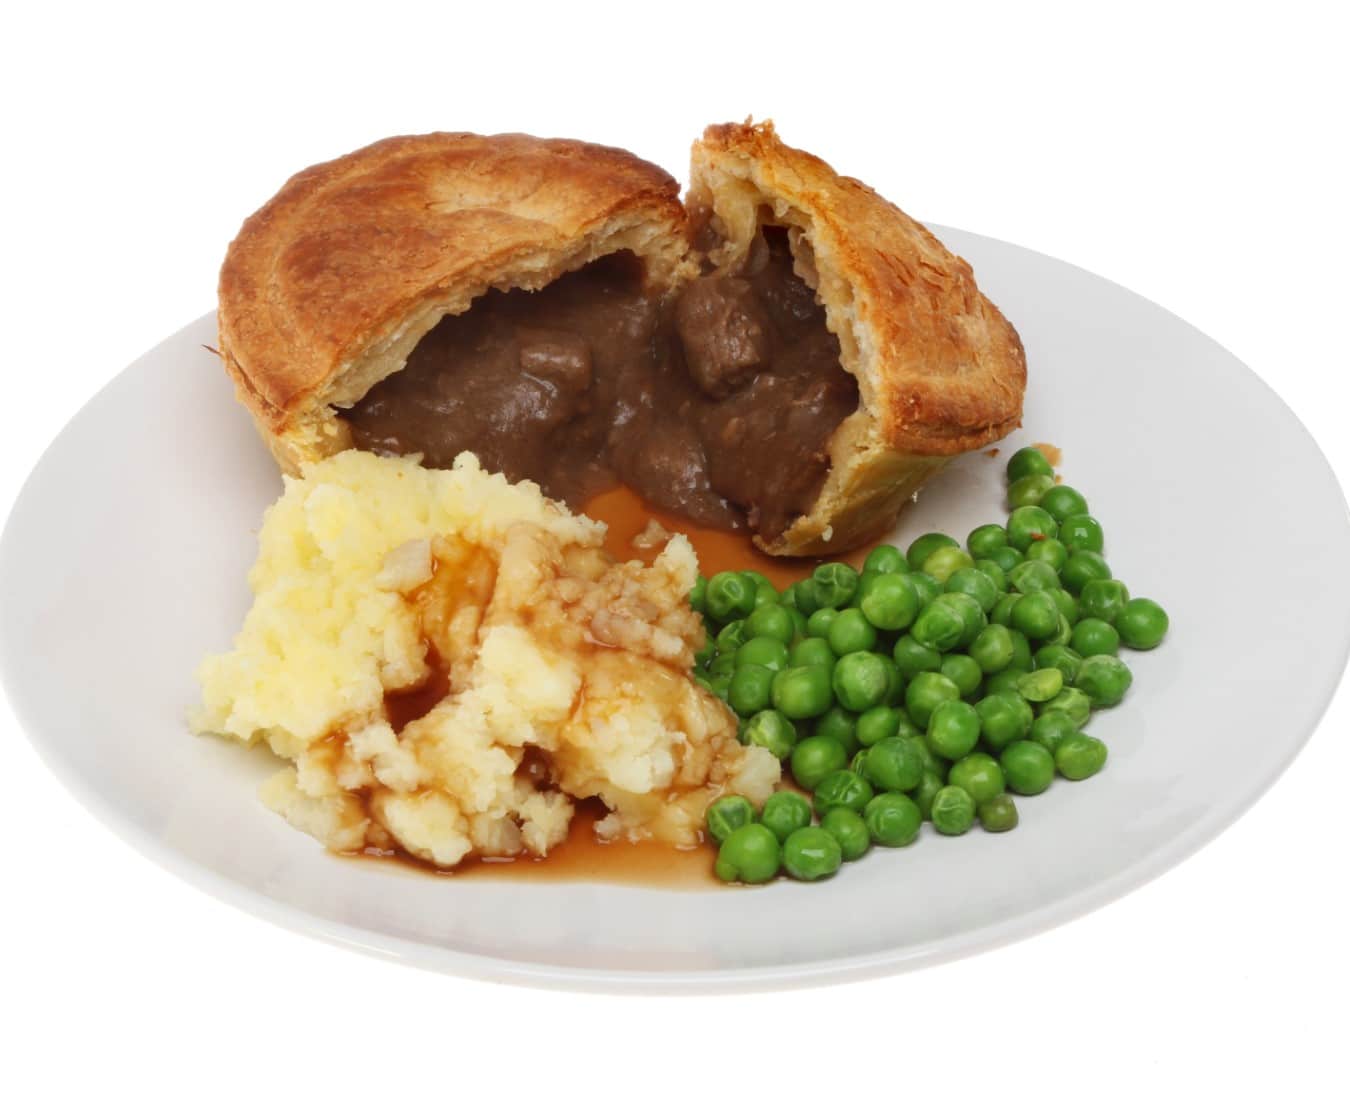 Buy Pie Mash and liquor 453g Online at the Best Price Free UK Delivery Bradley's Fish